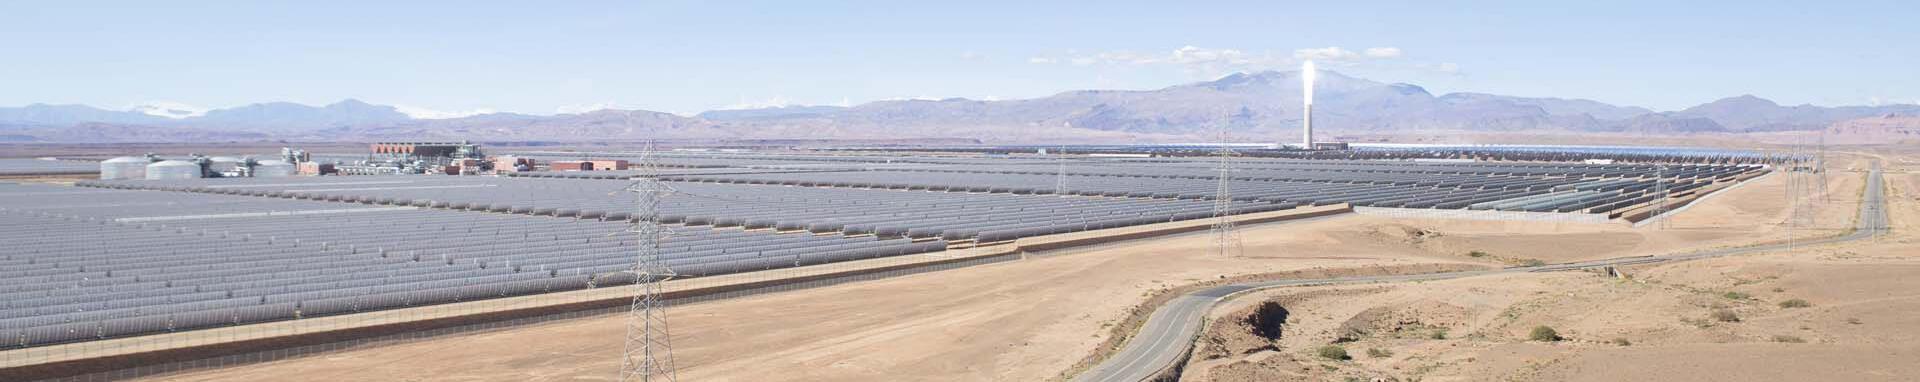 CIF ActionFollow The newest part of the NOOR solar plant in Ouarzazate, Morocco, 2019.